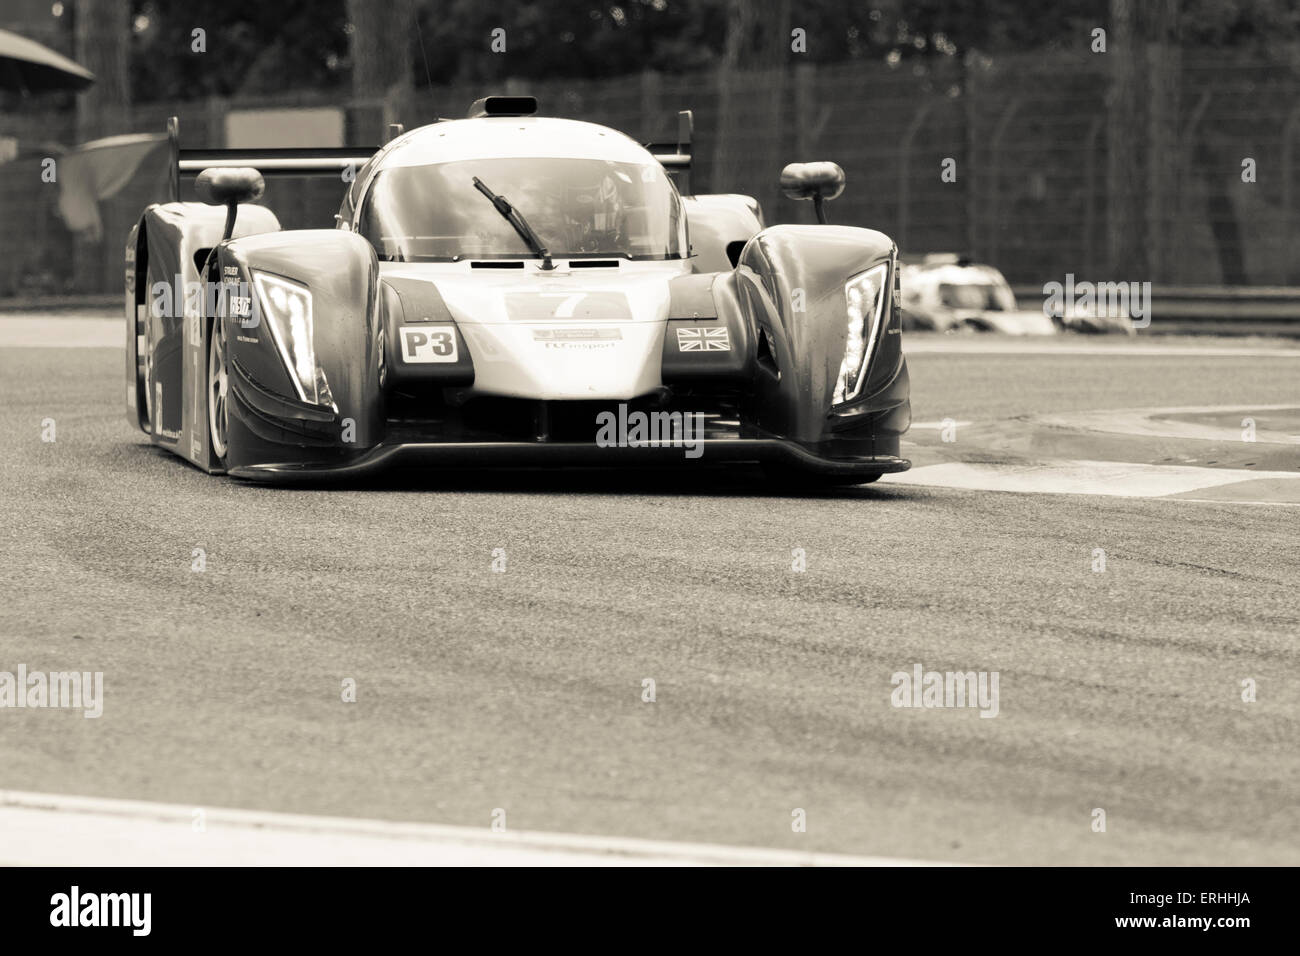 Imola, Italy – May 16, 2015: Ginetta – Nissan of University Of Bolton Team, in action during the European Le Mans Series Stock Photo